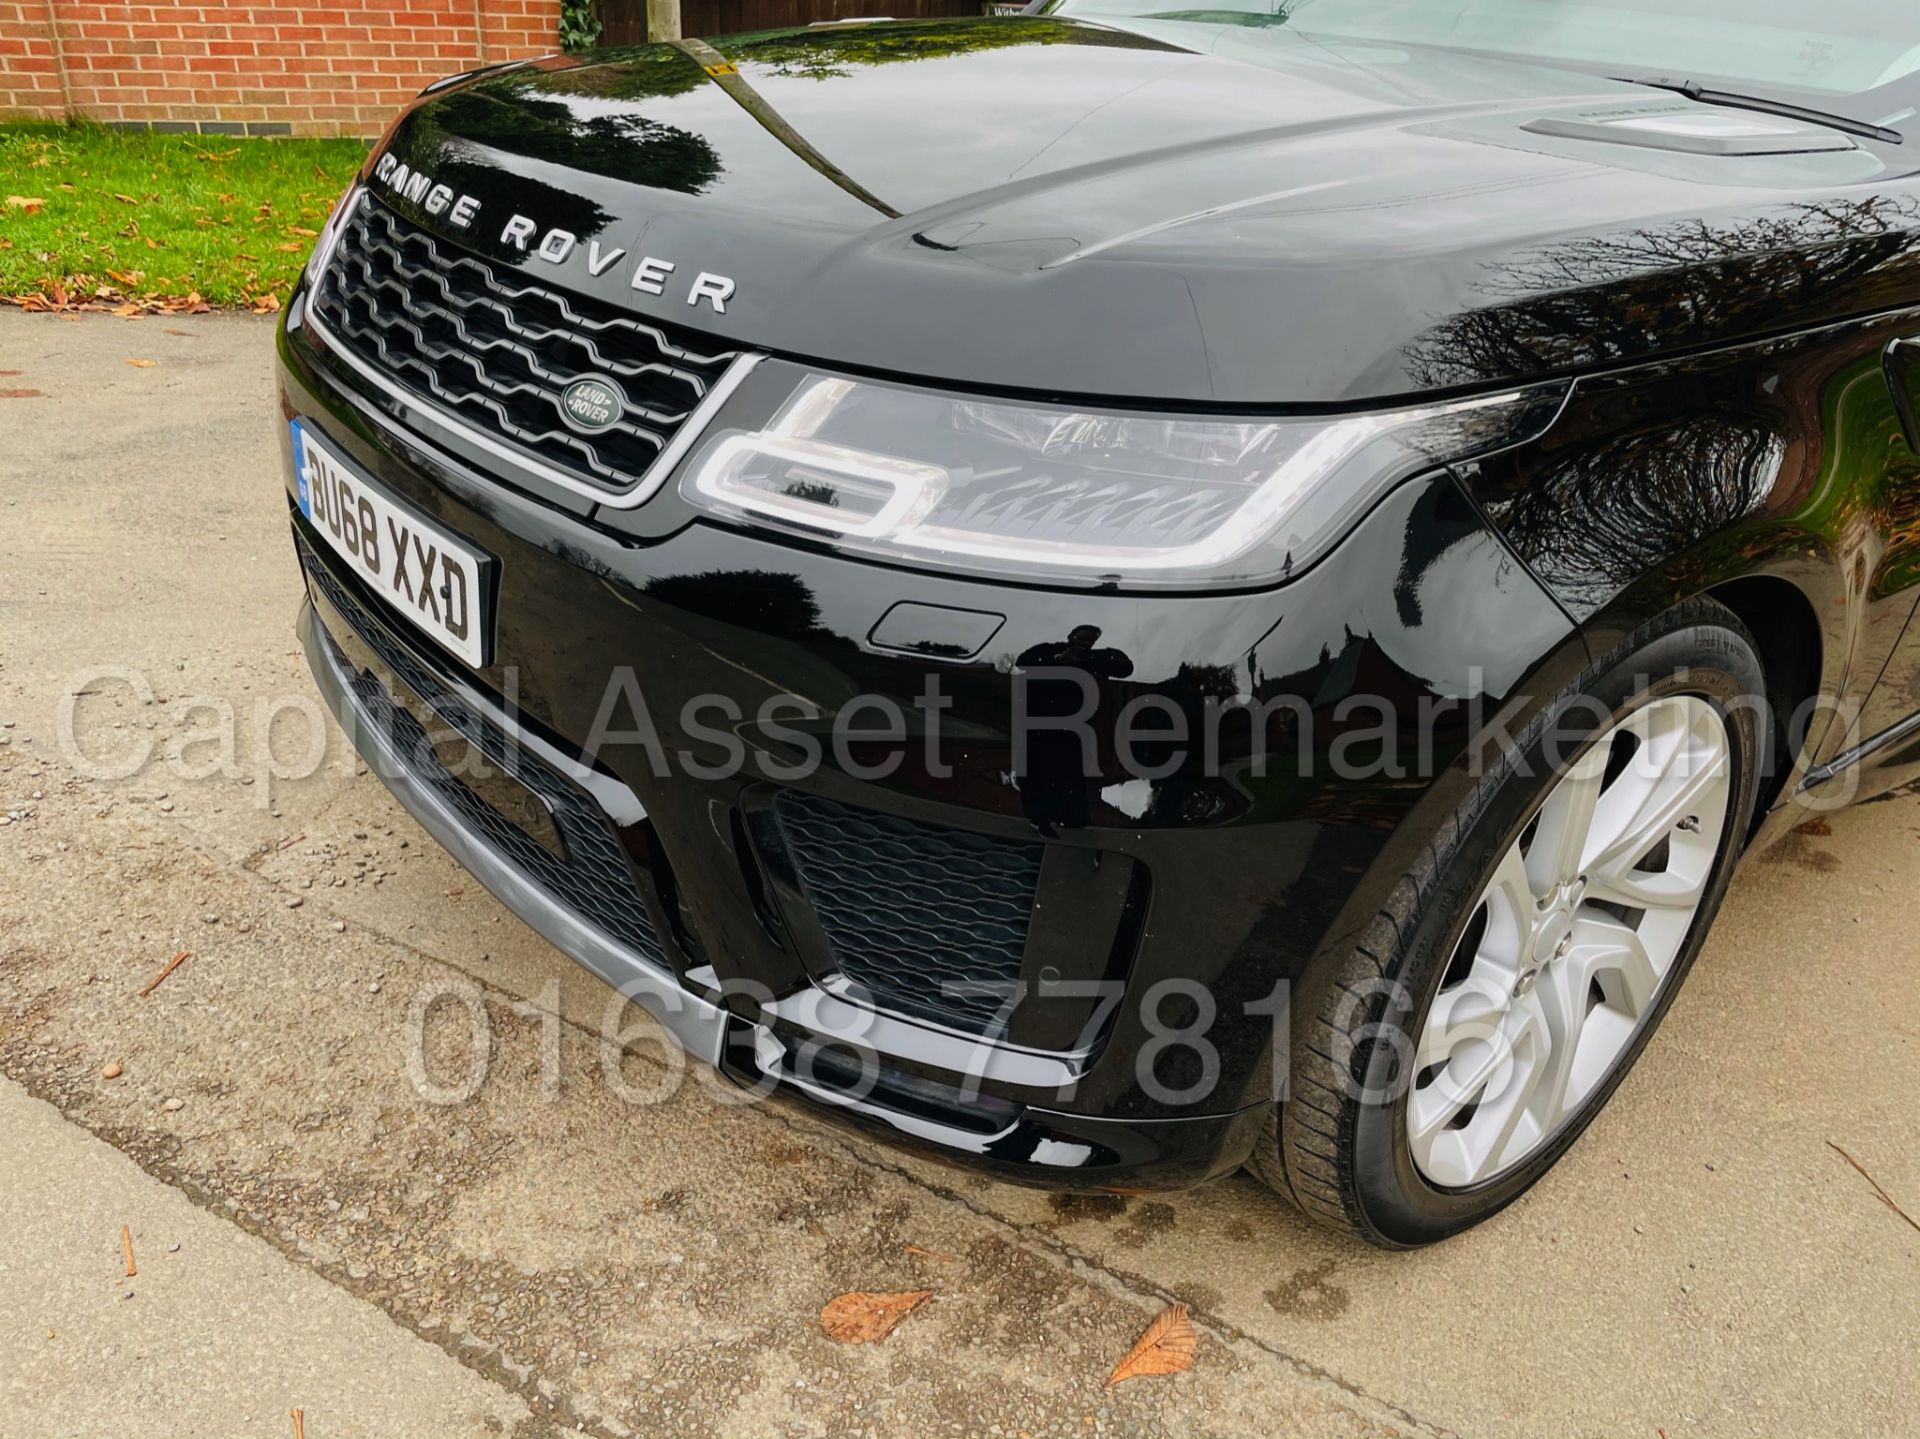 RANGE ROVER SPORT *HSE EDITION* SUV (2019 MODEL) '3.0 SDV6 - 306 BHP - 8 SPEED AUTO' *FULLY LOADED* - Image 16 of 56